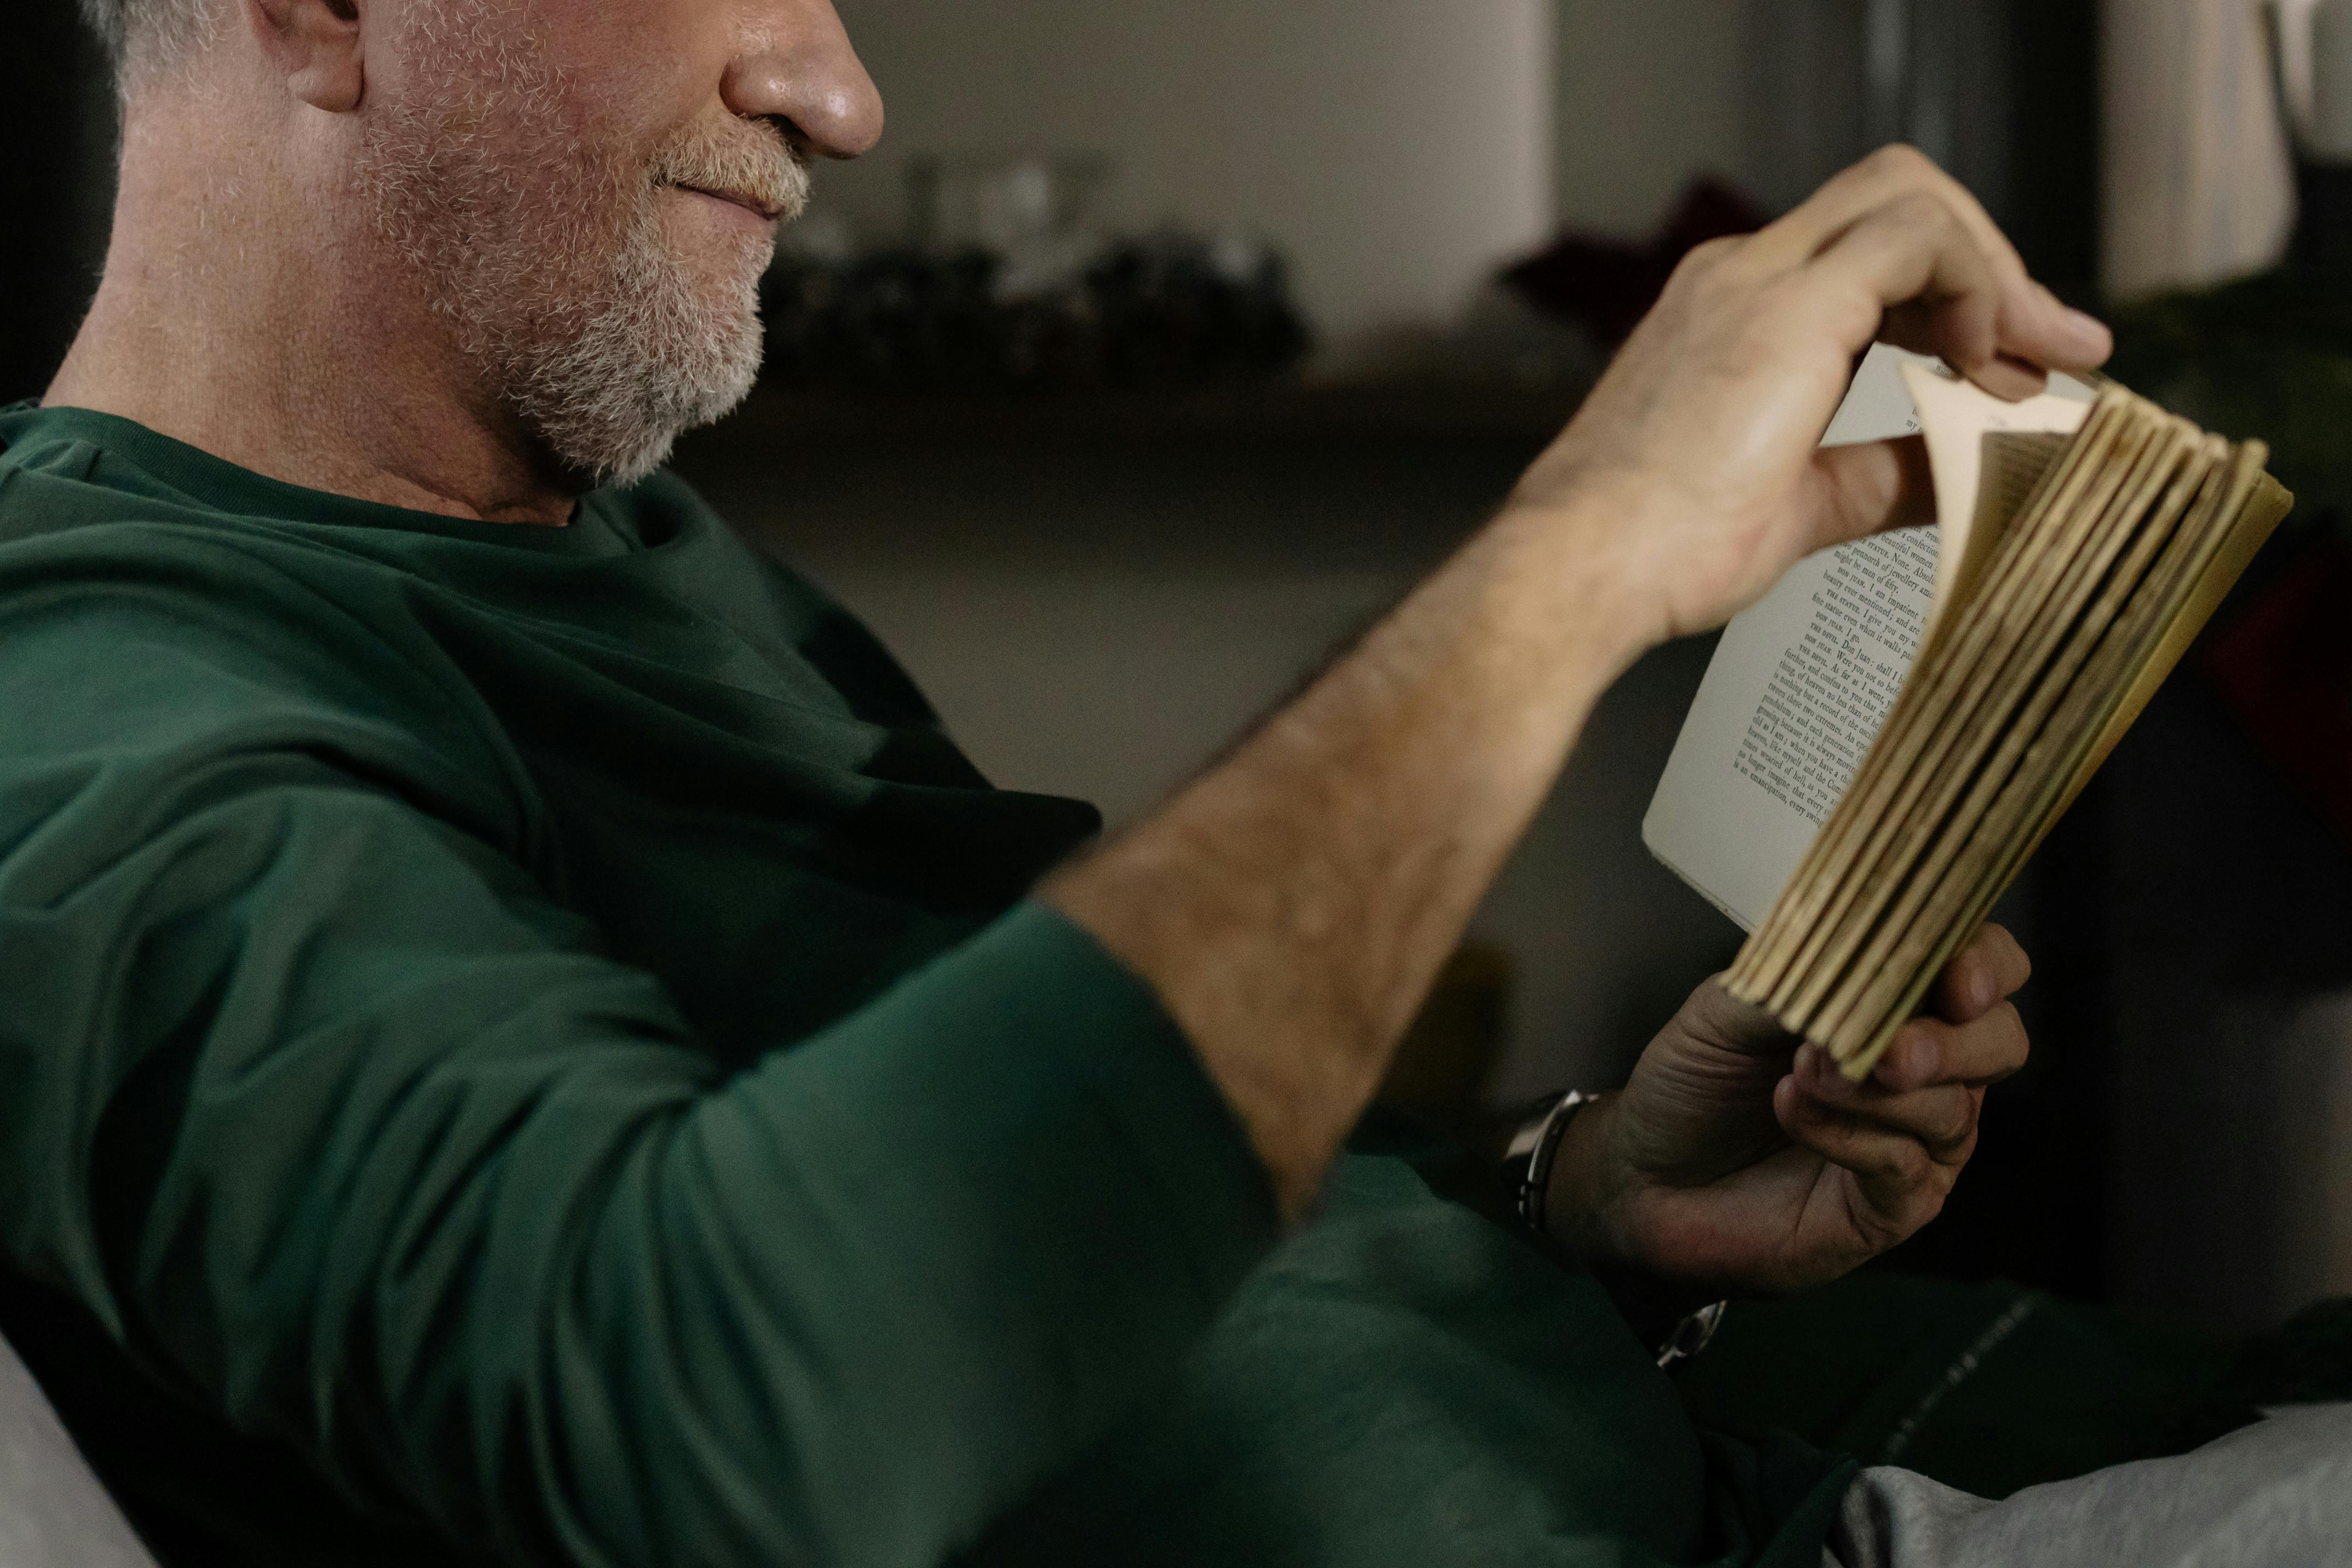 An old man paging through a book | Source: Pexels